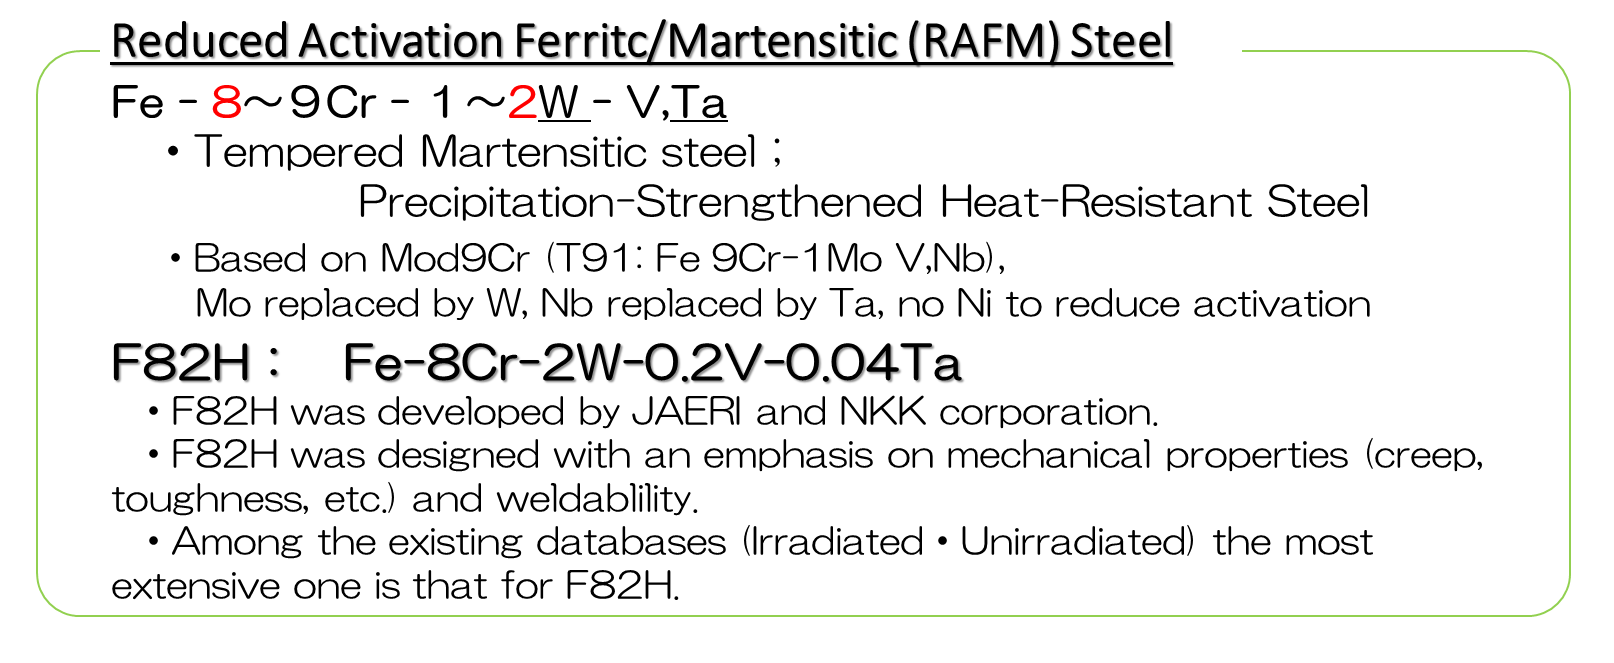 R&D on Reduced Activation Ferritic/Martensitic Steelsの画像1